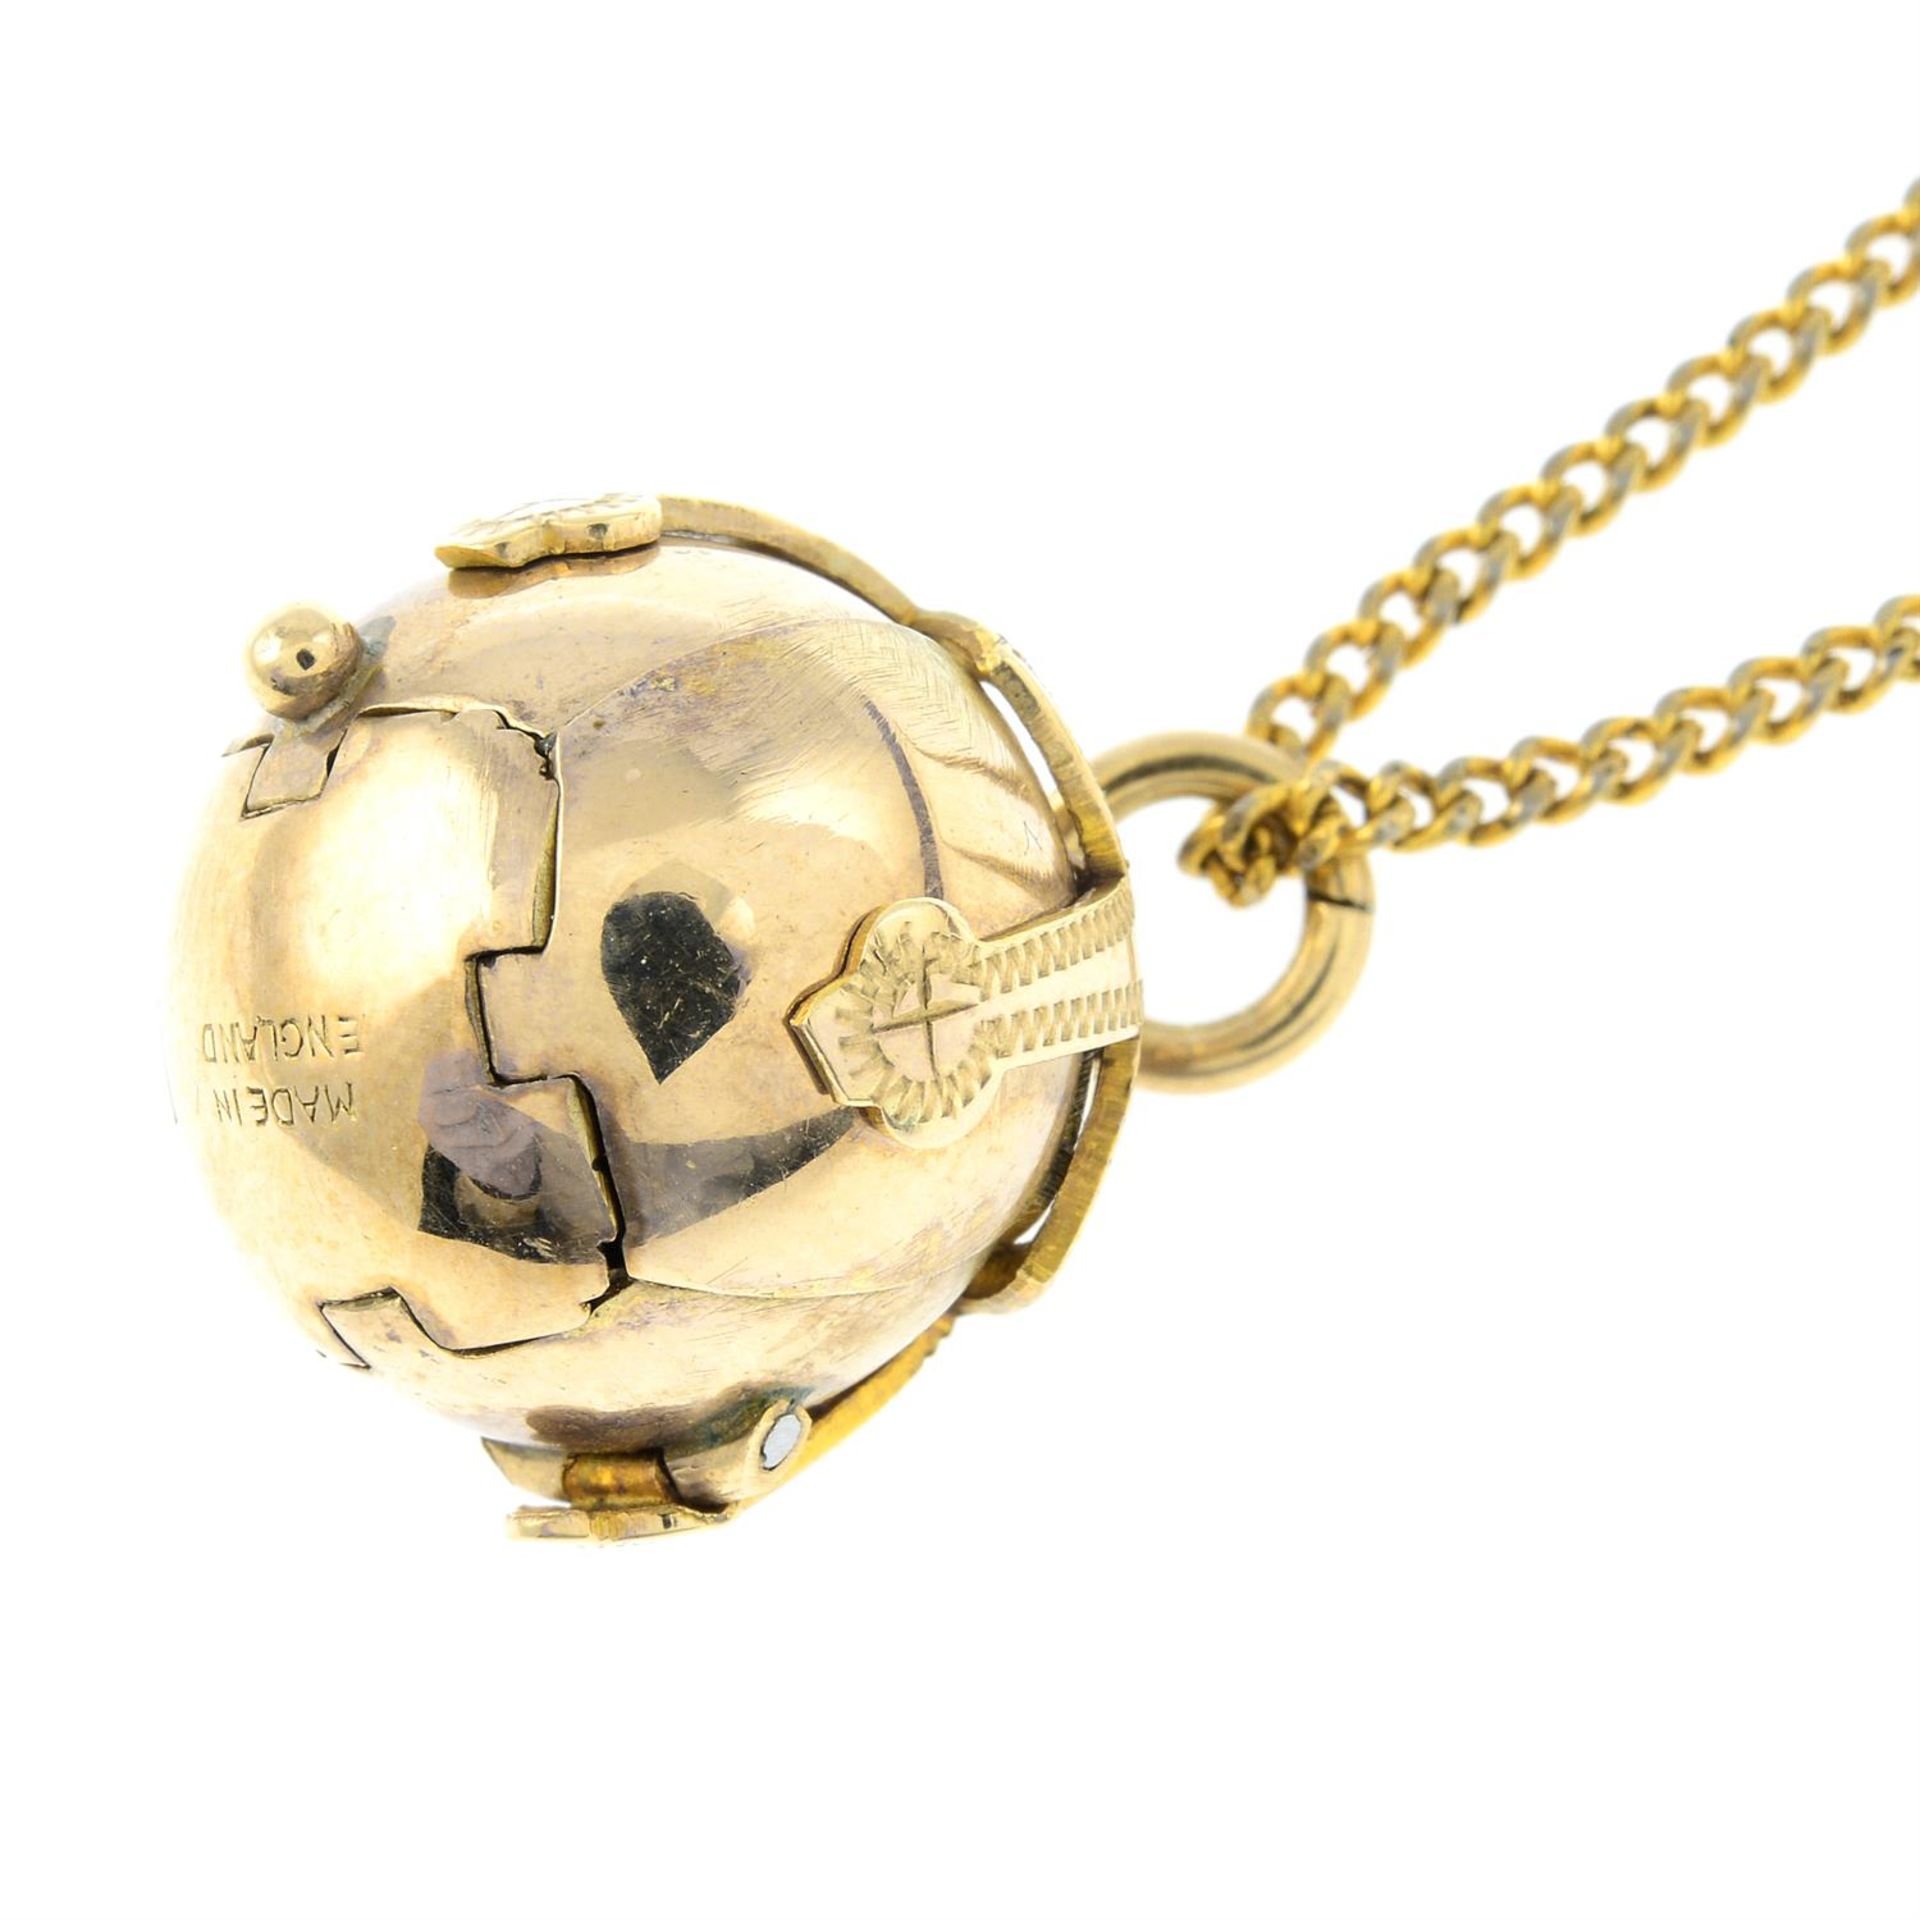 A Masonic ball pendant, with chain. - Image 2 of 3